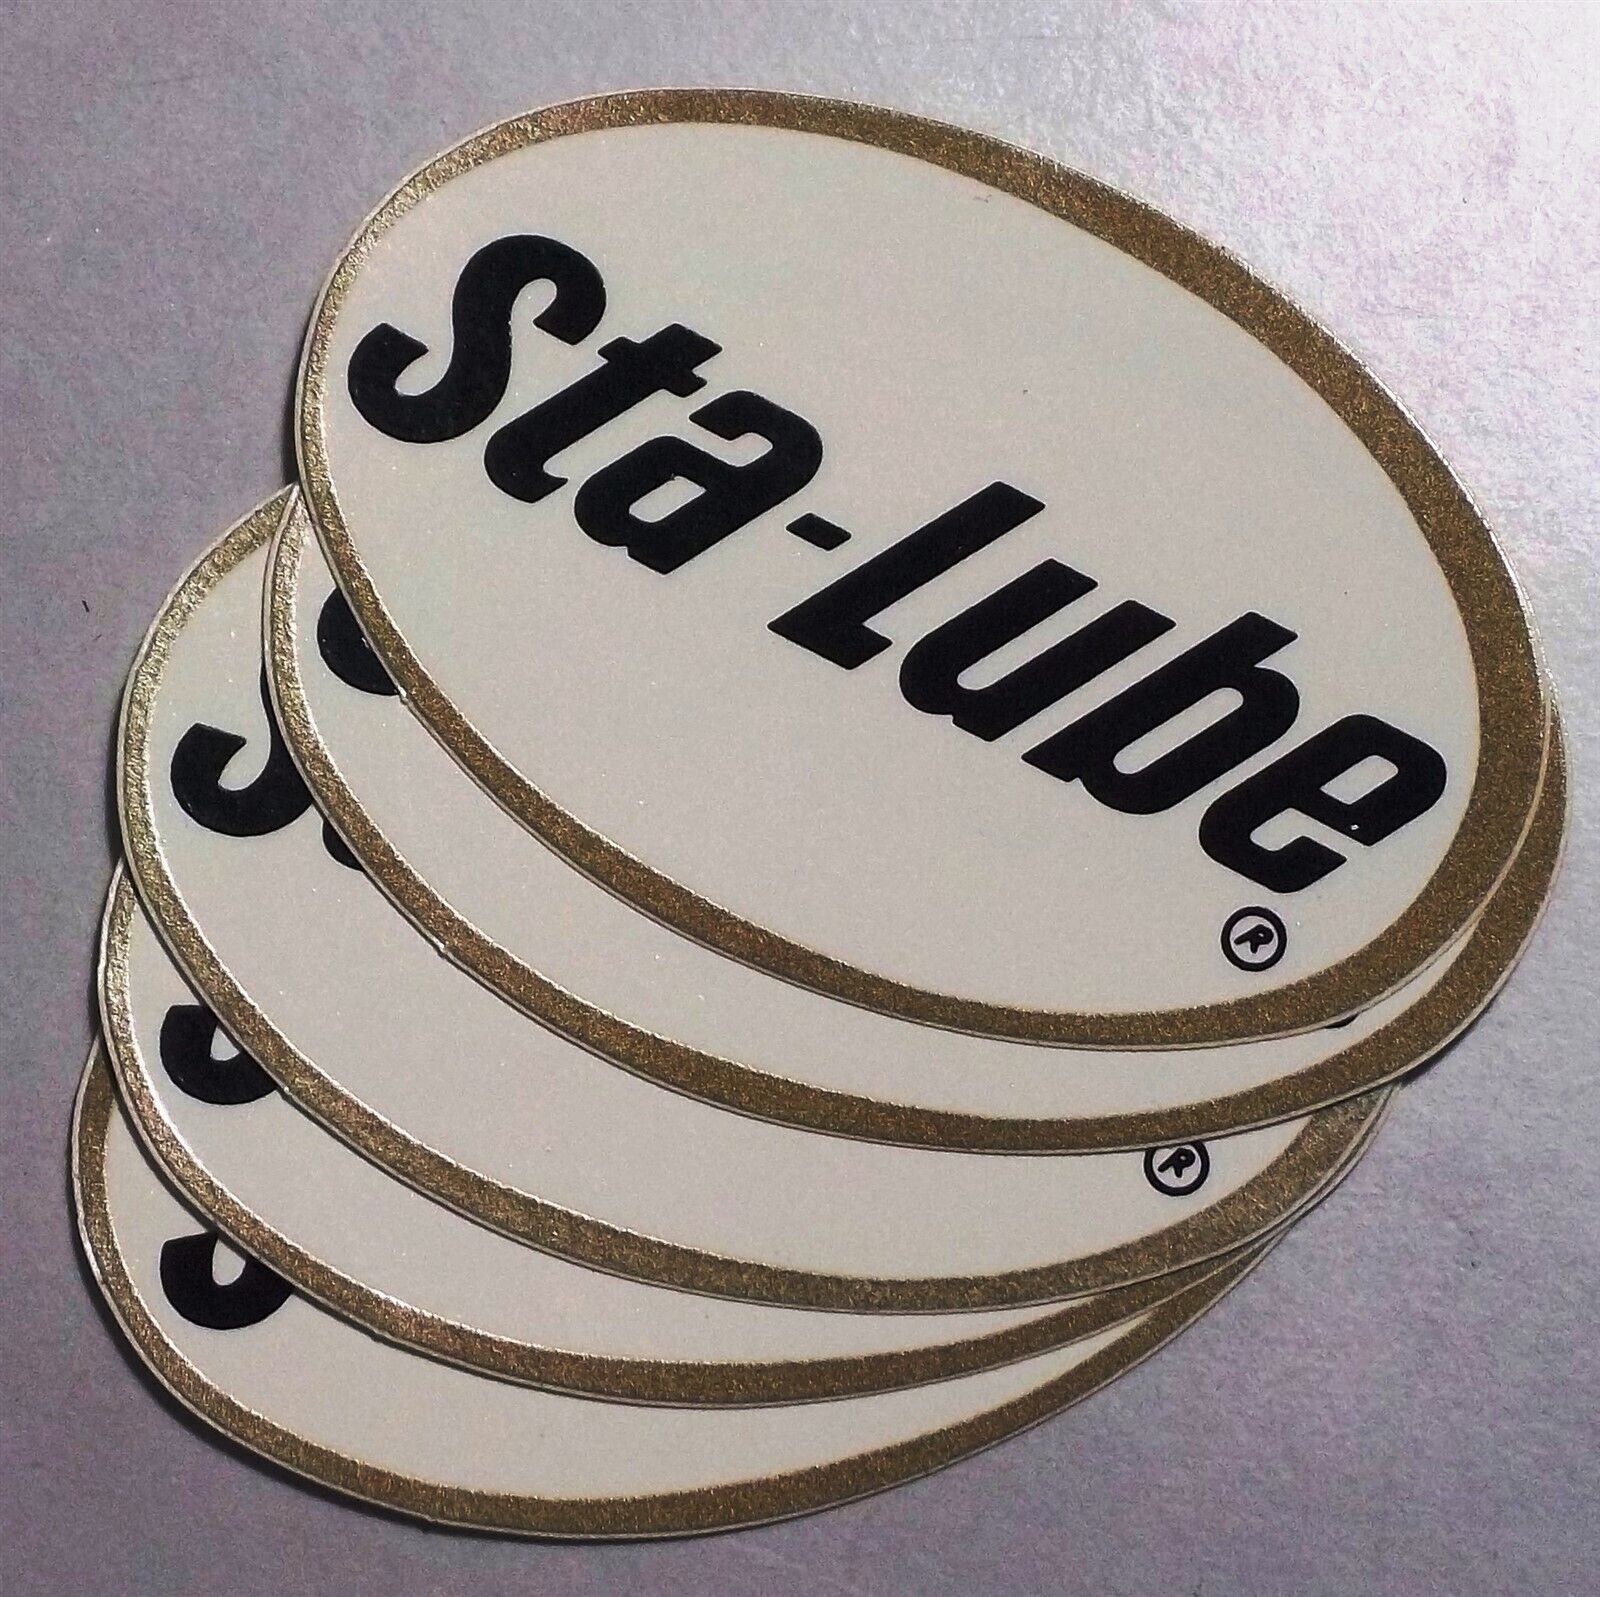 Sta-Lube Vintage Sticker Set of 5 - Classic Design - Small Oval